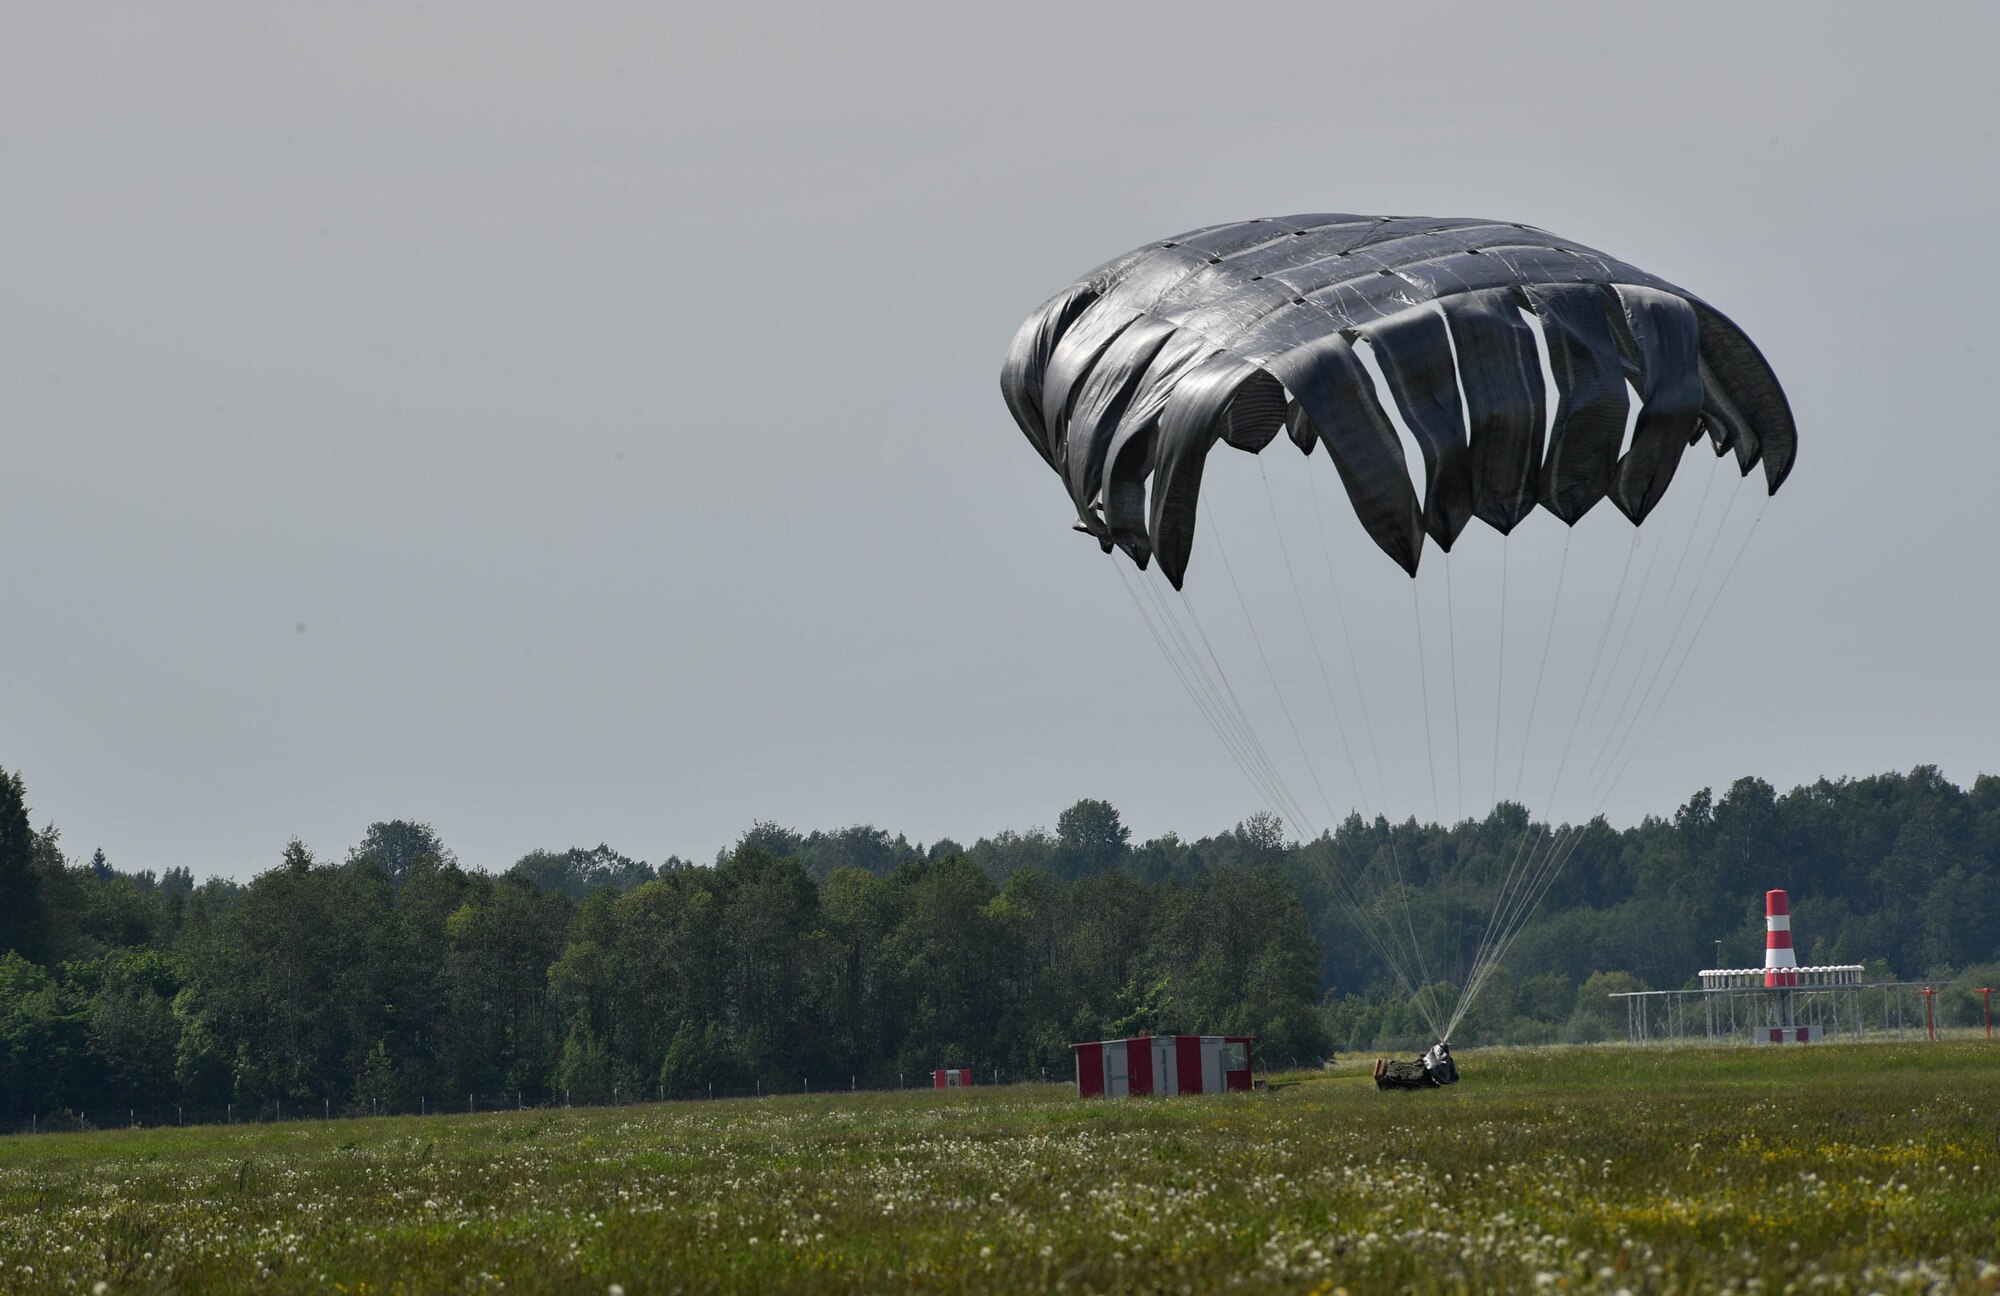 A pallet of equipment lands on the ground after being dropped out of a U.S. Air Force C-130J Super Hercules during exercise Saber Strike 17 on Lielvārde Air Base, Latvia, June 7, 2017. The 435th Contingency Response Group from the 435th Air Ground Operations Wing at Ramstein Air Base, Germany, dropped the bundle to practice assessing an area for aircraft landings. Saber Strike 17 continues to increase participating nations’ capacity to conduct a full spectrum of military operations. (U.S. Air Force photo by Senior Airman Tryphena Mayhugh)